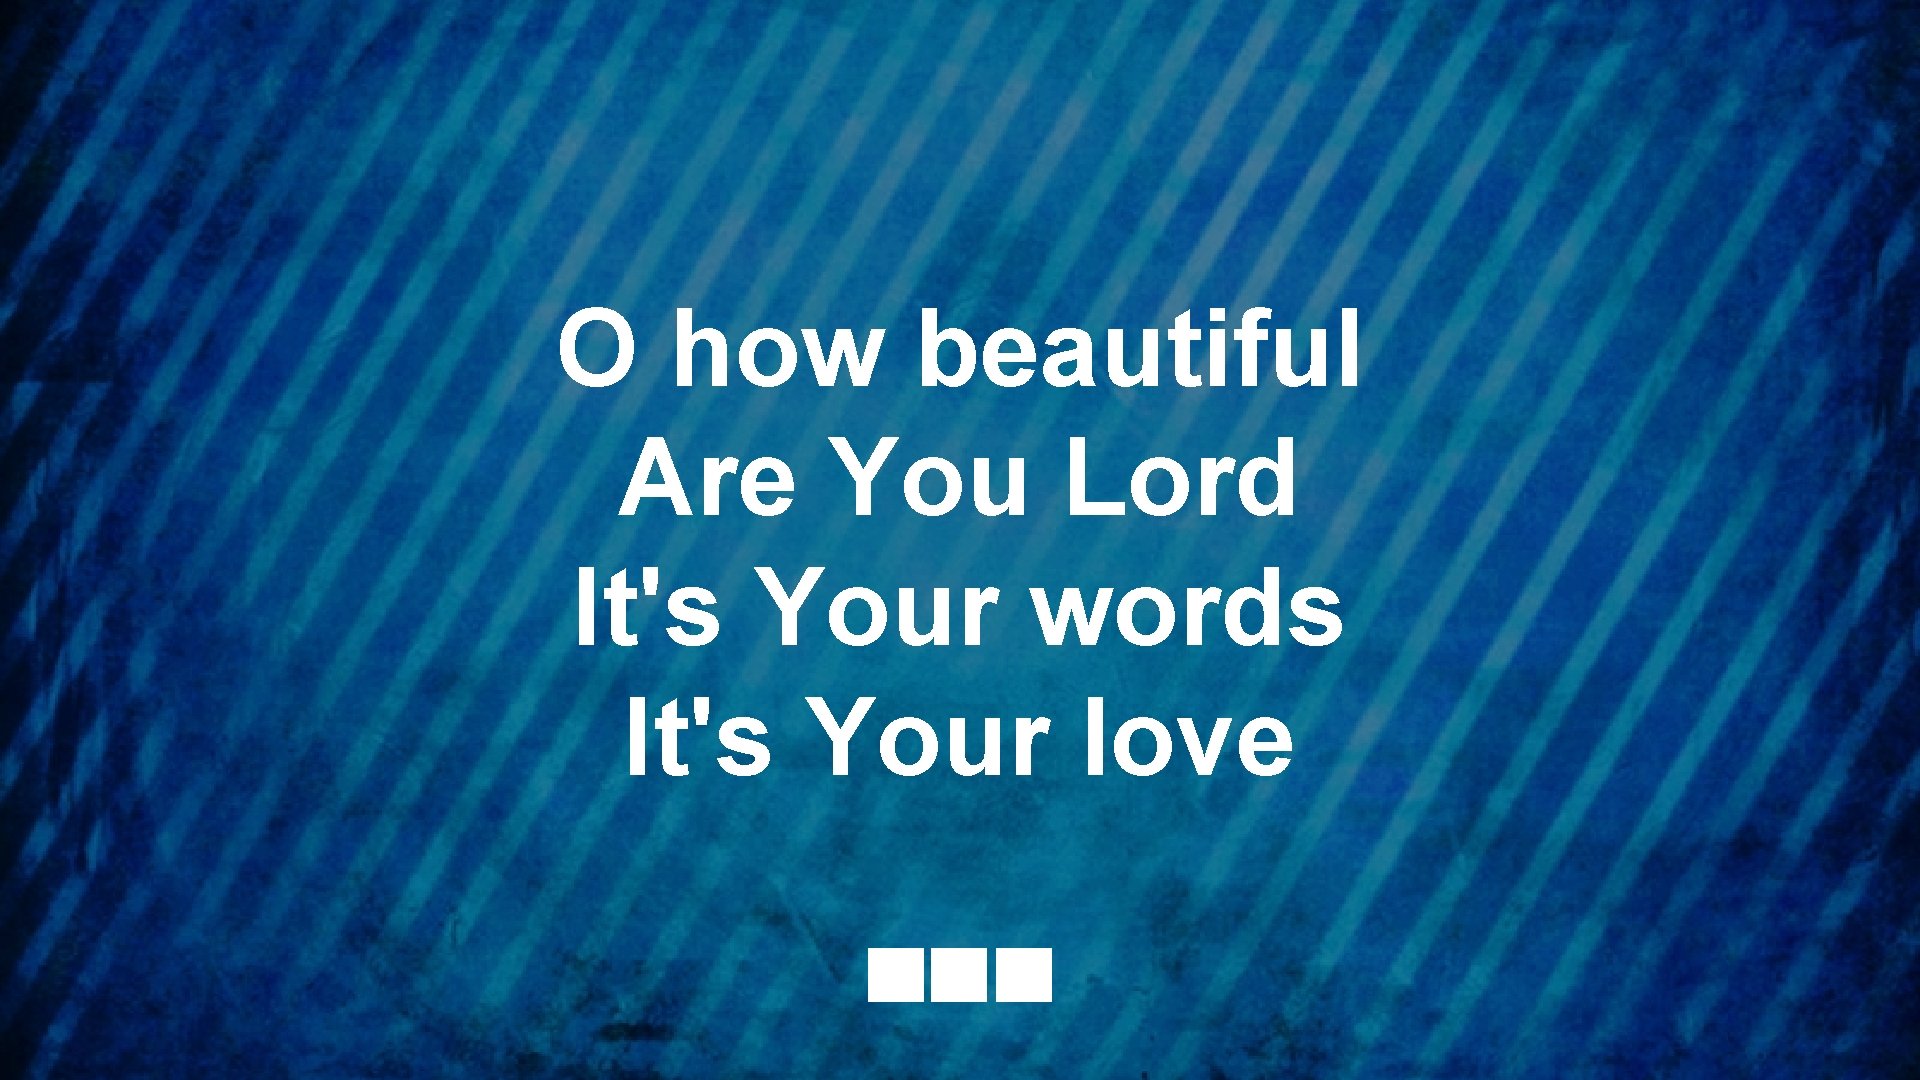 O how beautiful Are You Lord It's Your words It's Your love 